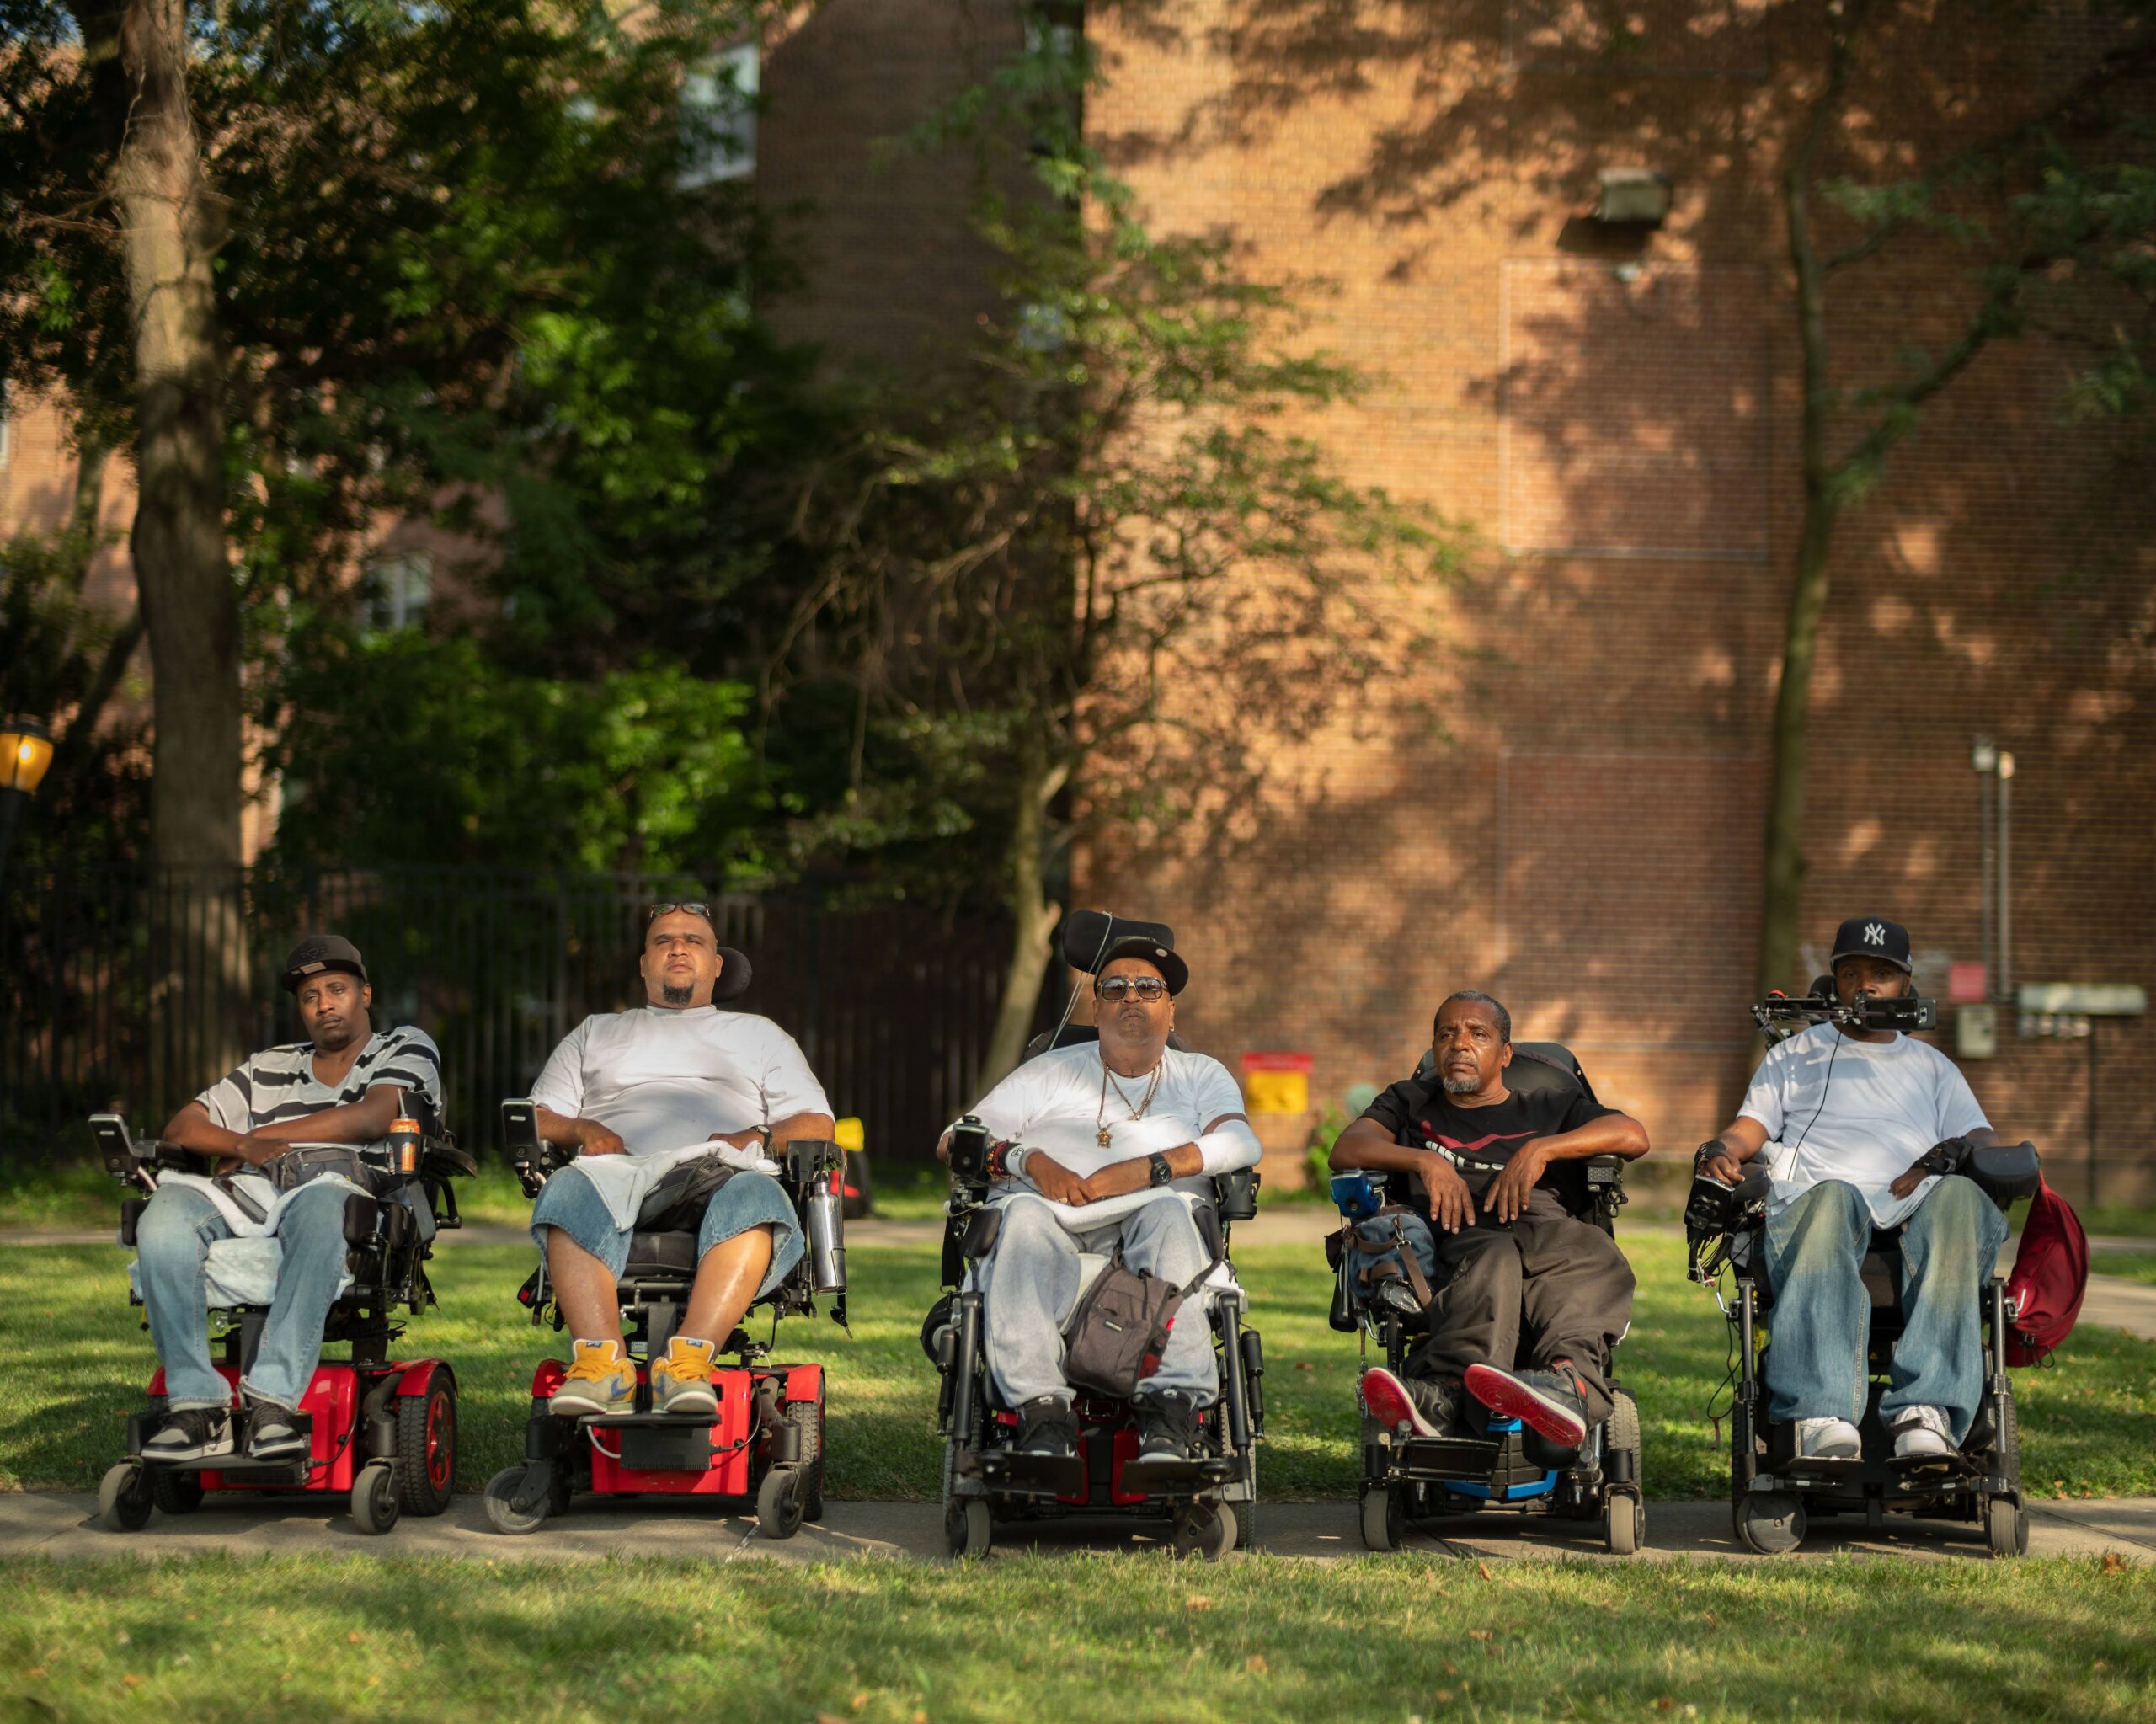 Five men in wheel chairs outside in front of a brick building.